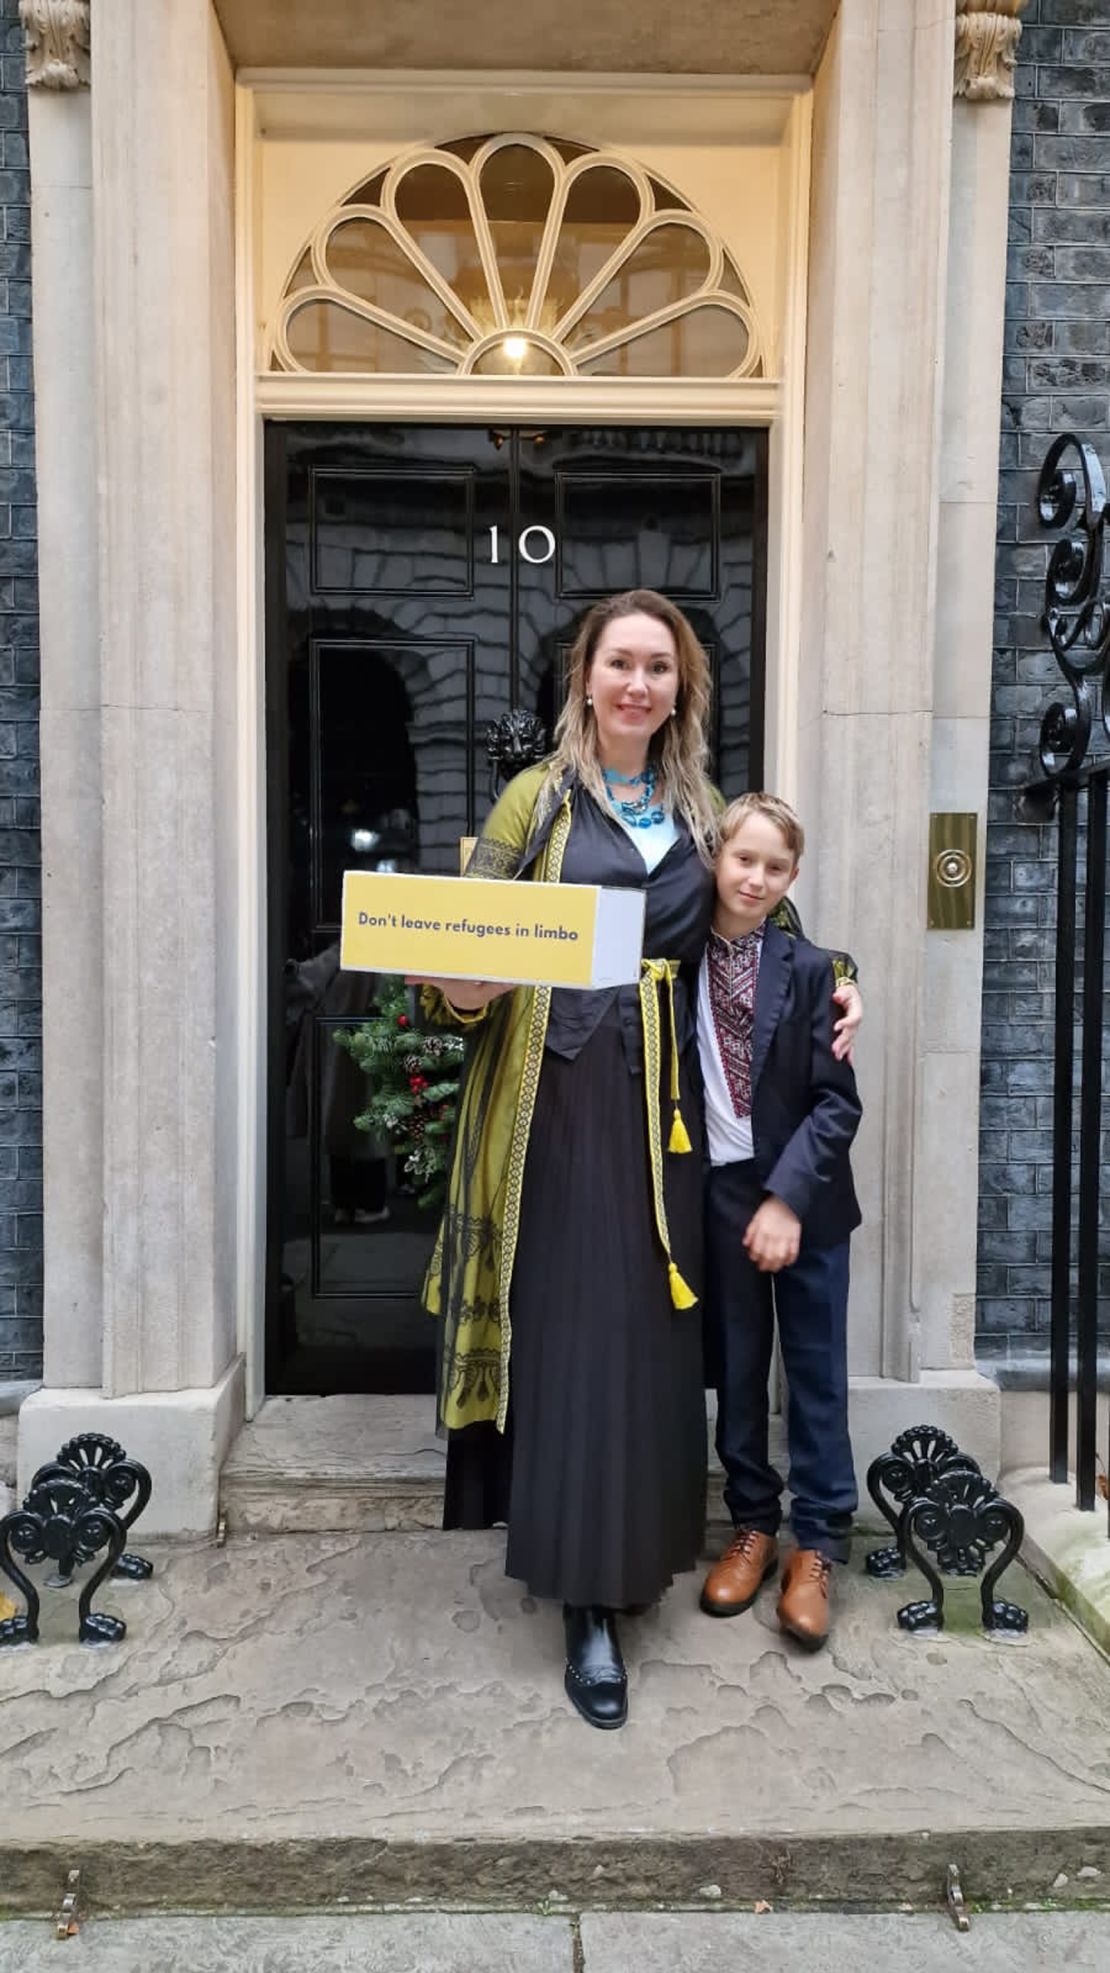 Tania Orlova and her son, Danylo, delivering a petition to 10 Downing Street, asking for more support for Ukrainian refugees in the UK.